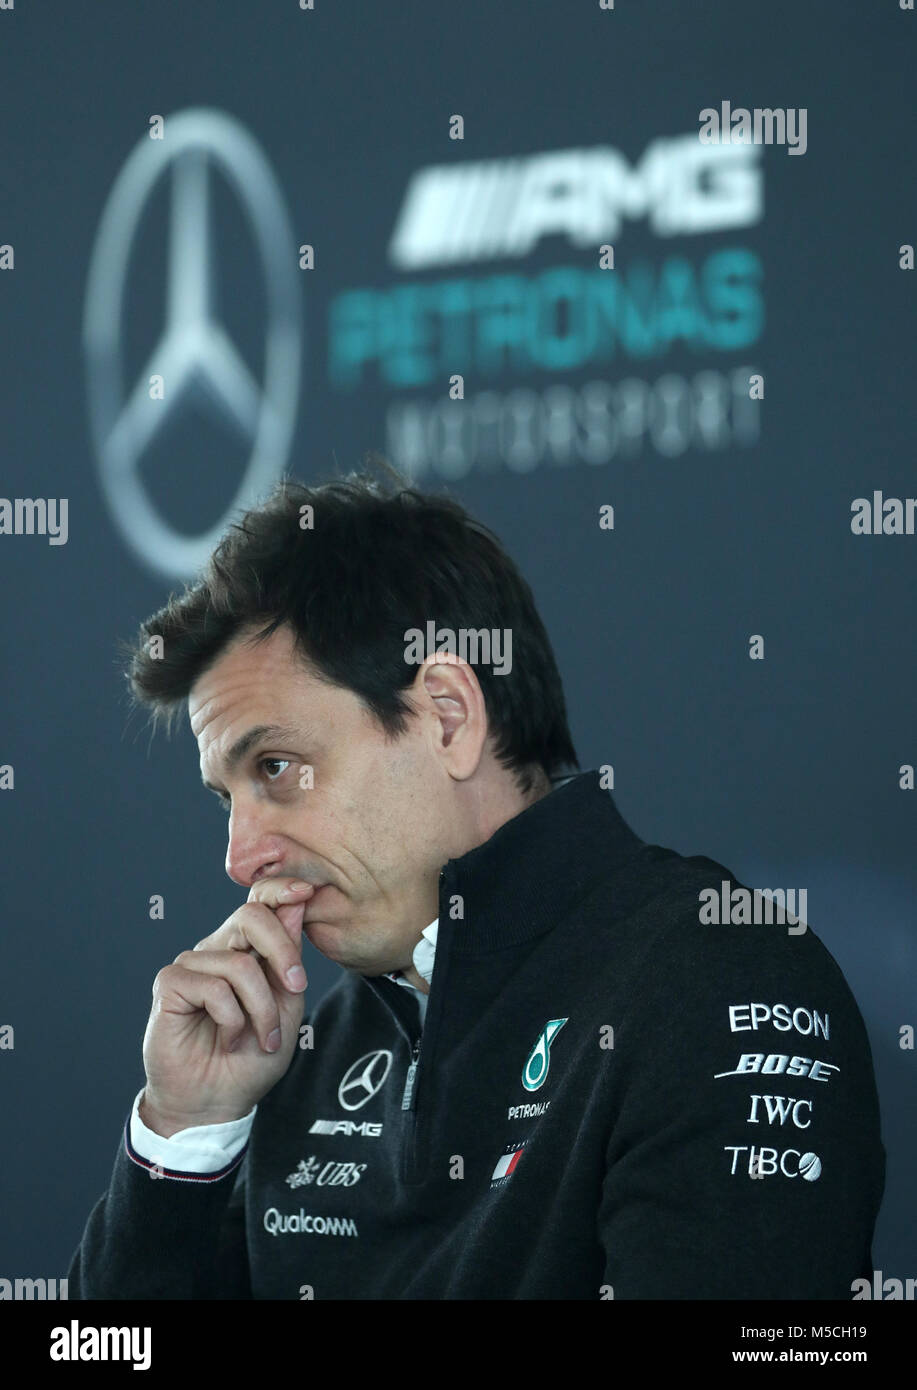 Mercedes team principal Toto Wolff during the Mercedes-AMG F1 2018 car launch at Silverstone, Towcester. Stock Photo